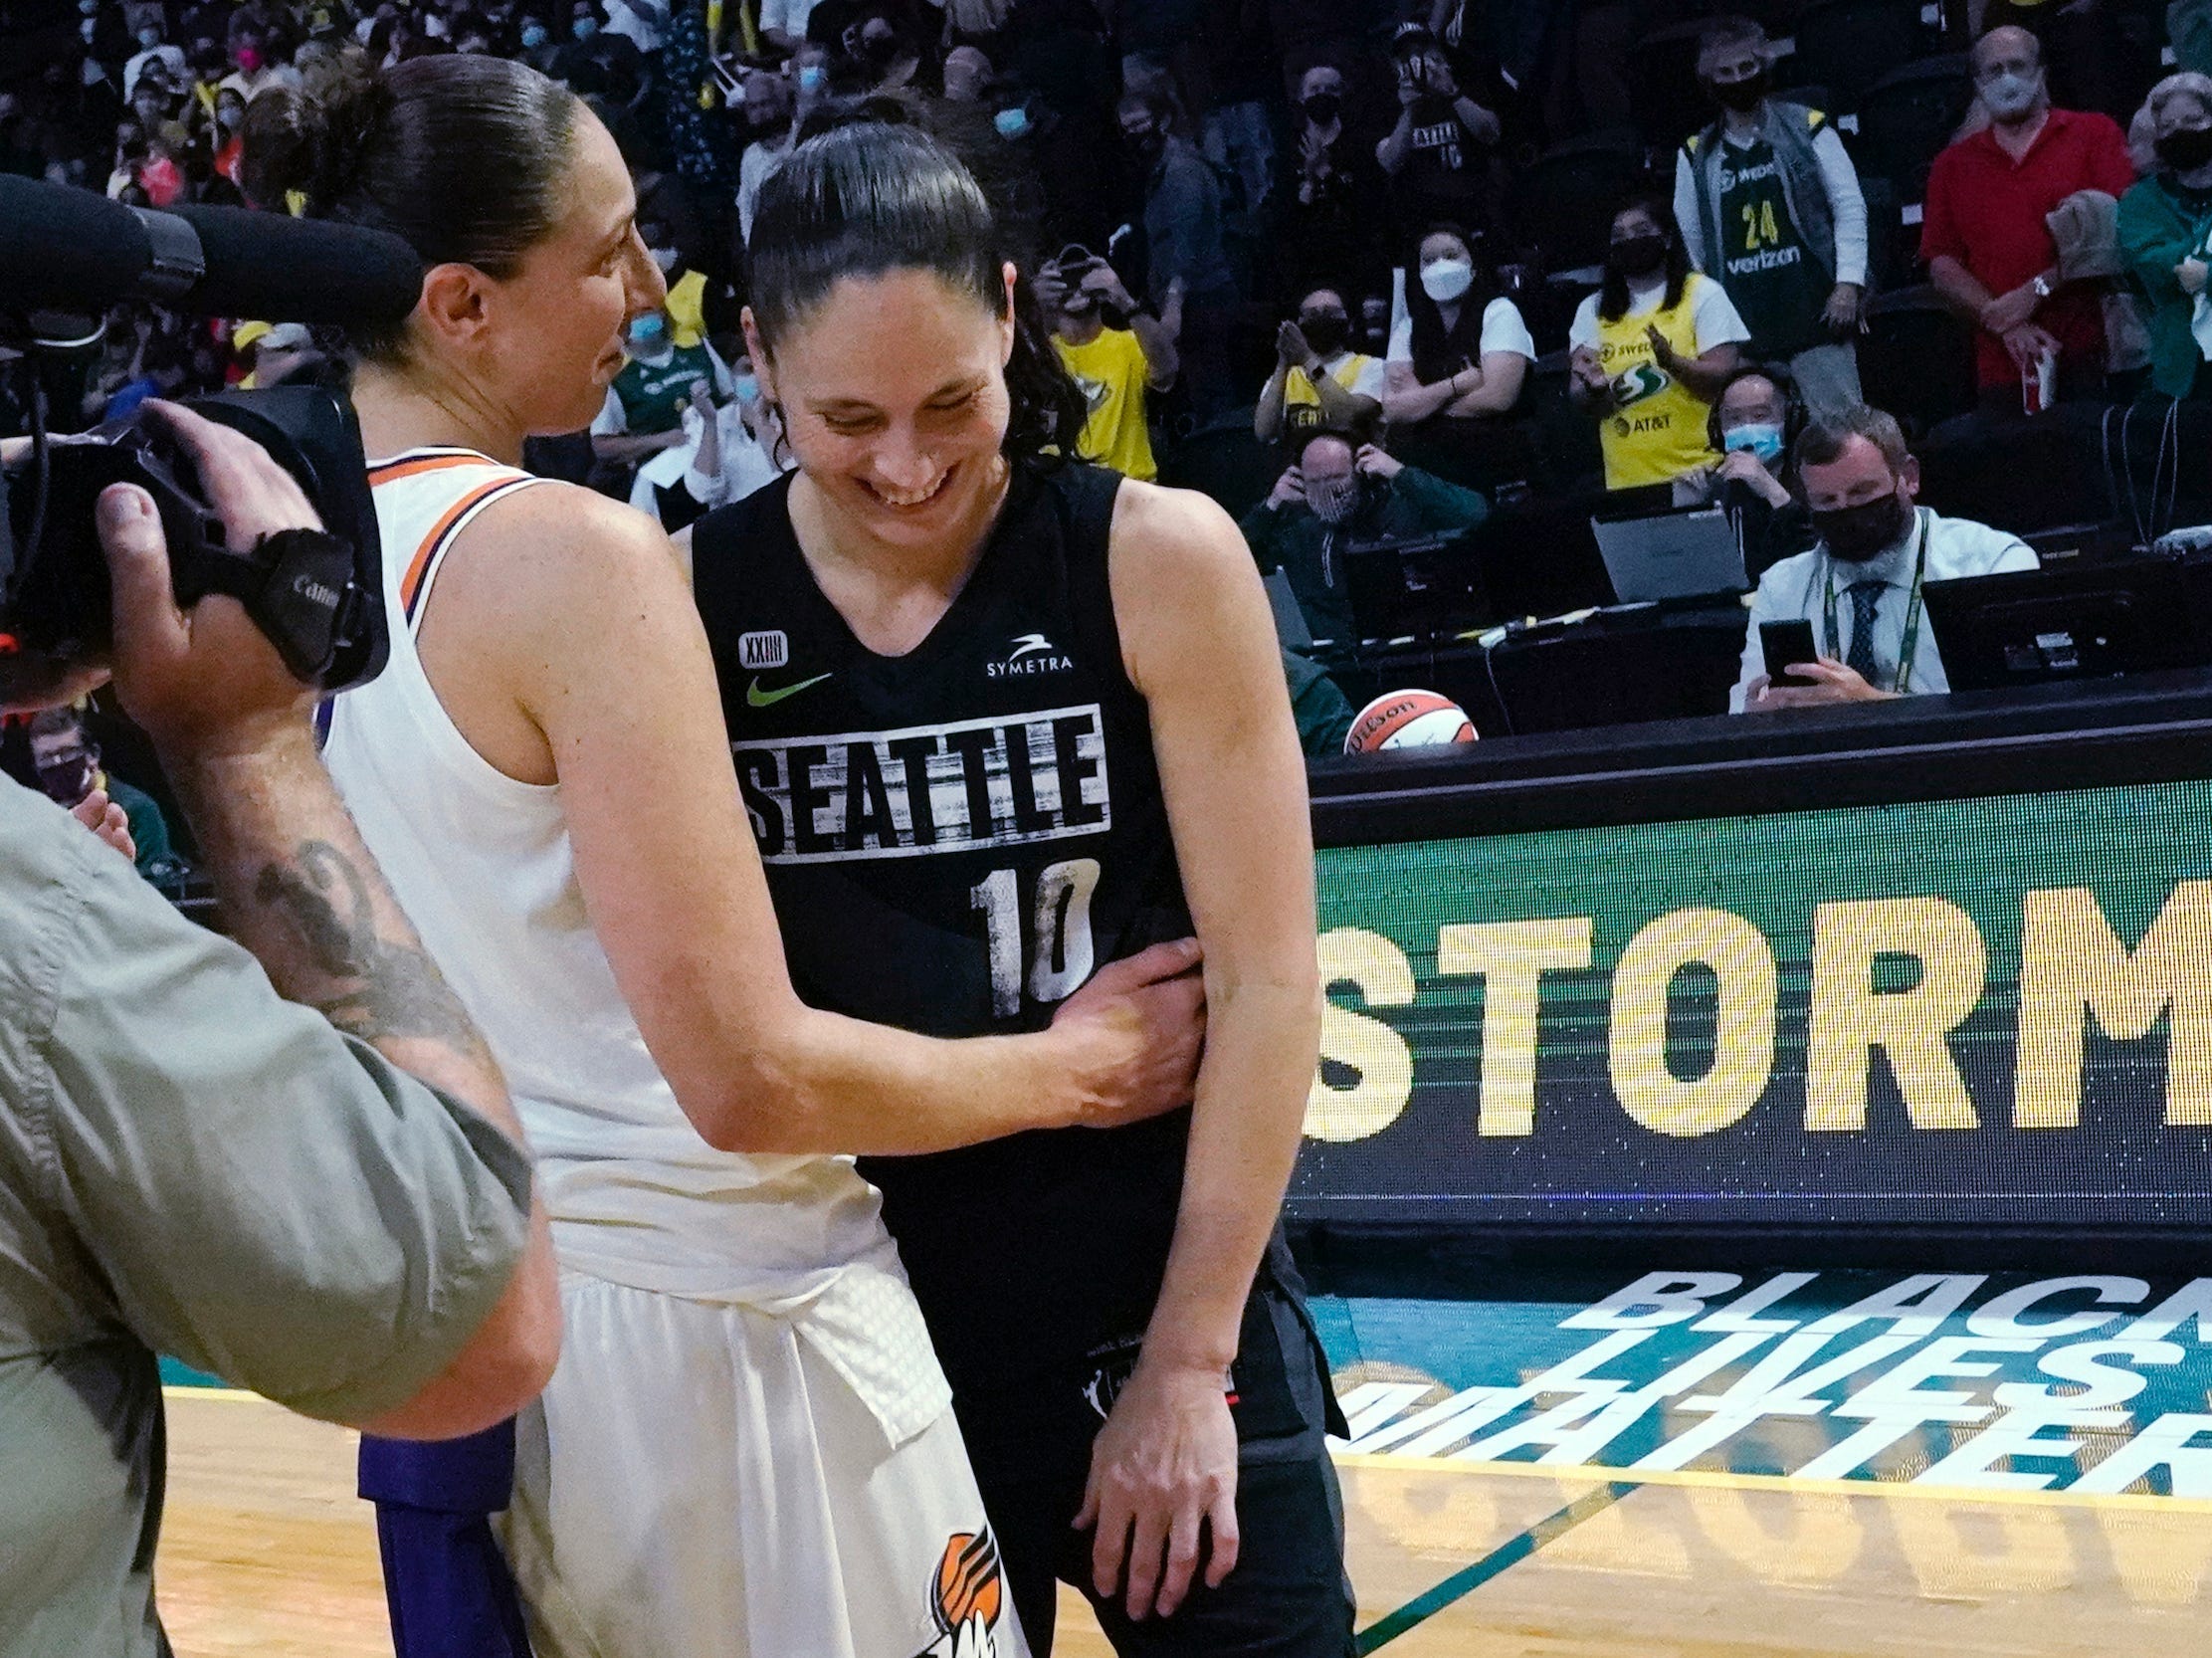 Sue Bird and Diana Taurasi shared an emotional jersey swap after what ...